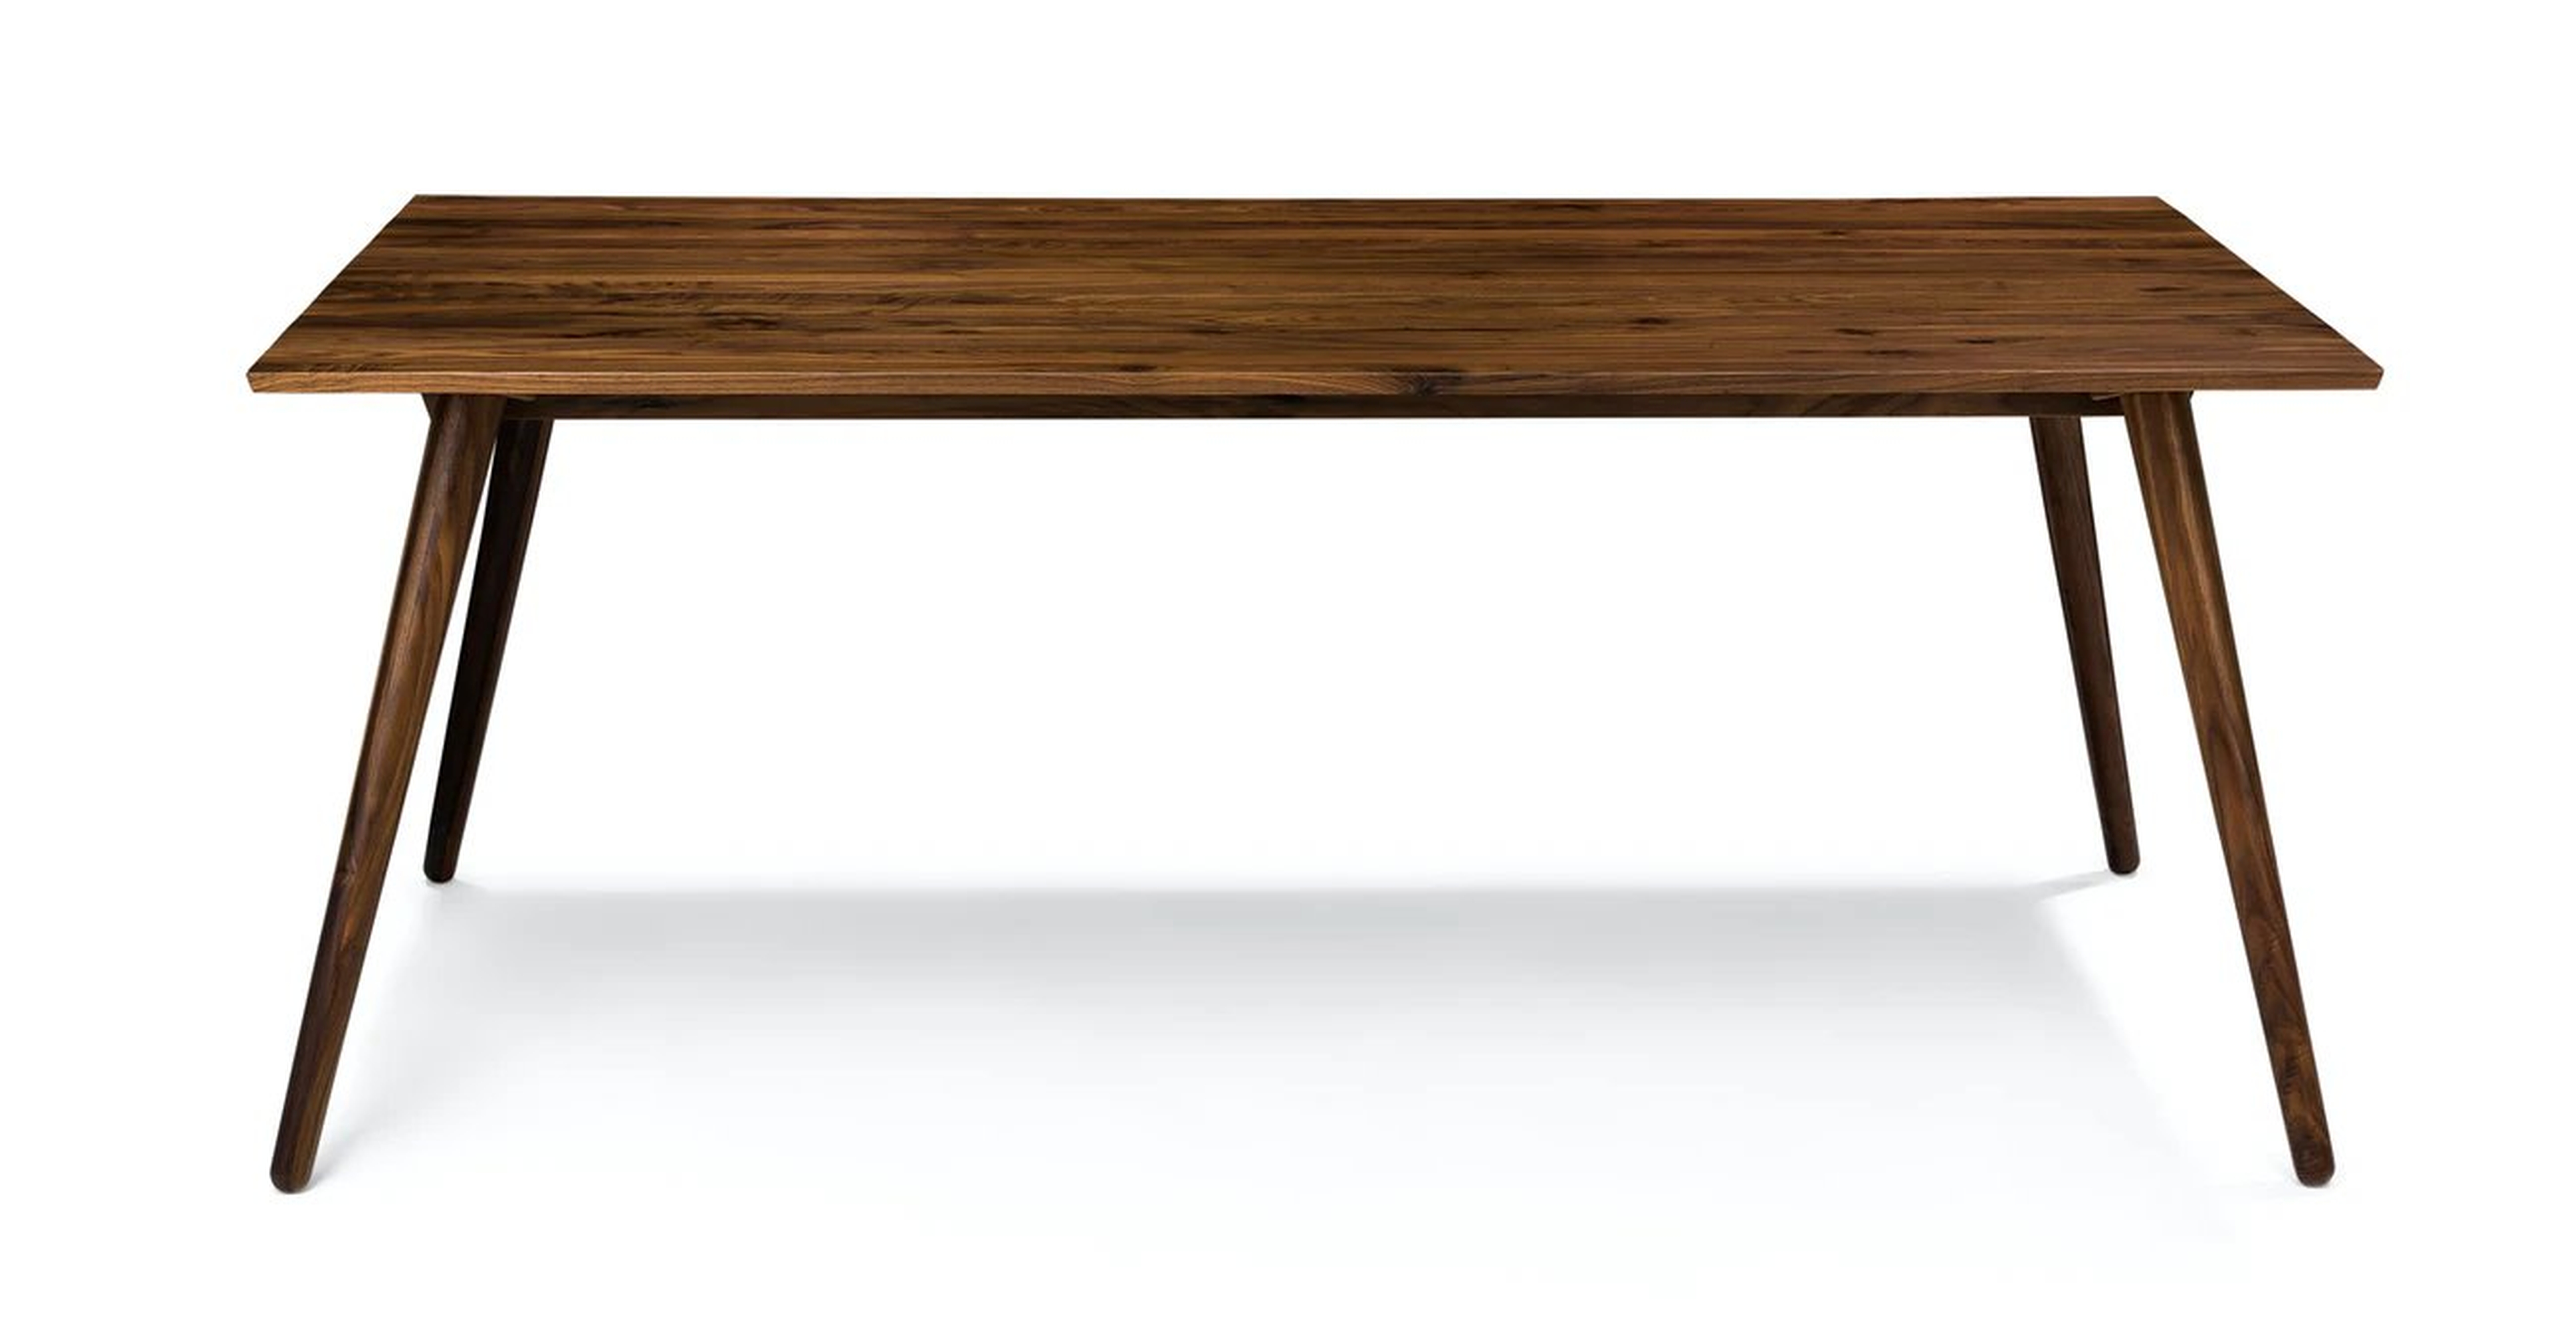 Seno Walnut Dining Table For 4-6 - Article